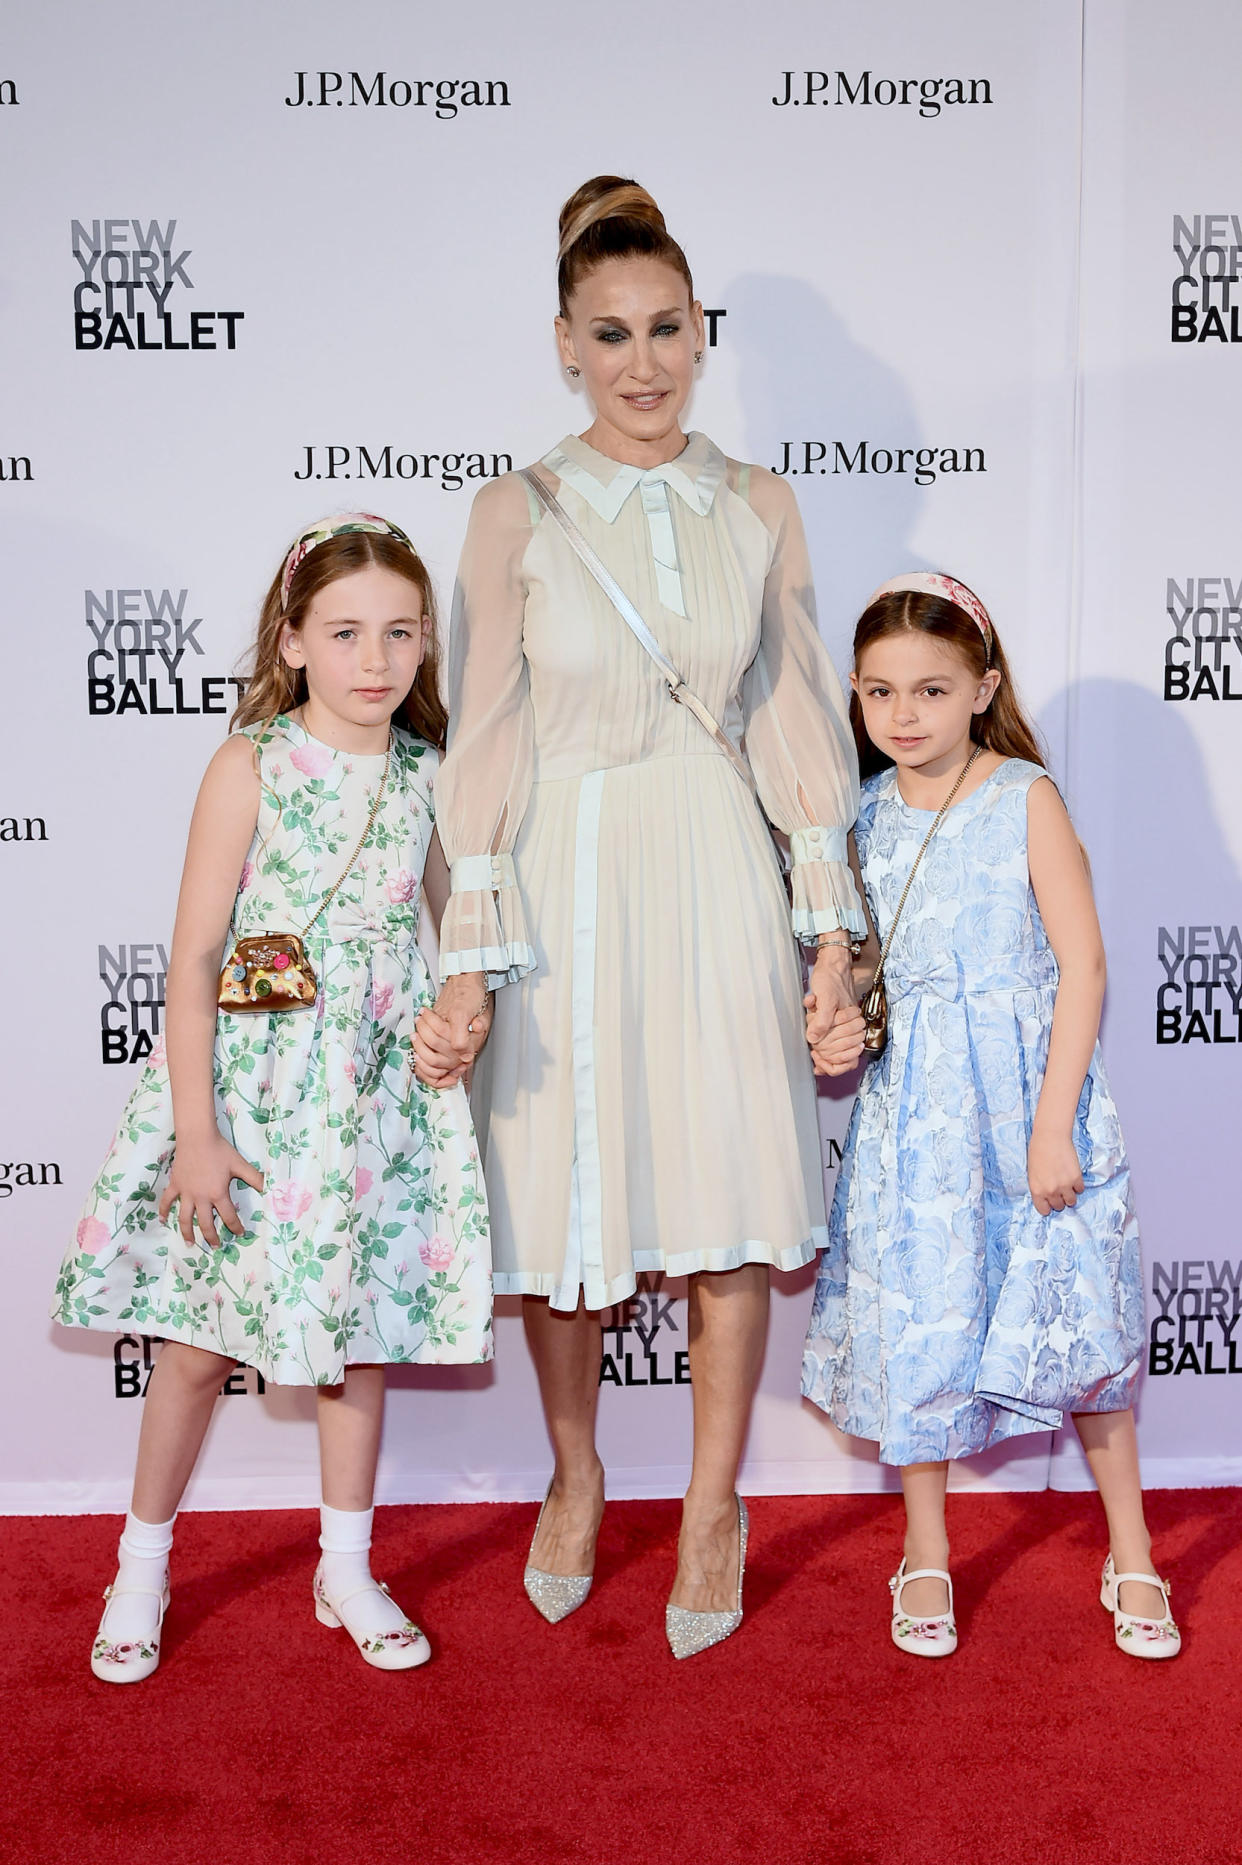 The family attend New York City Ballet 2018 Spring Gala at Lincoln Center on May 3, 2018 in New York City. (Steven Ferdman / Getty Images)